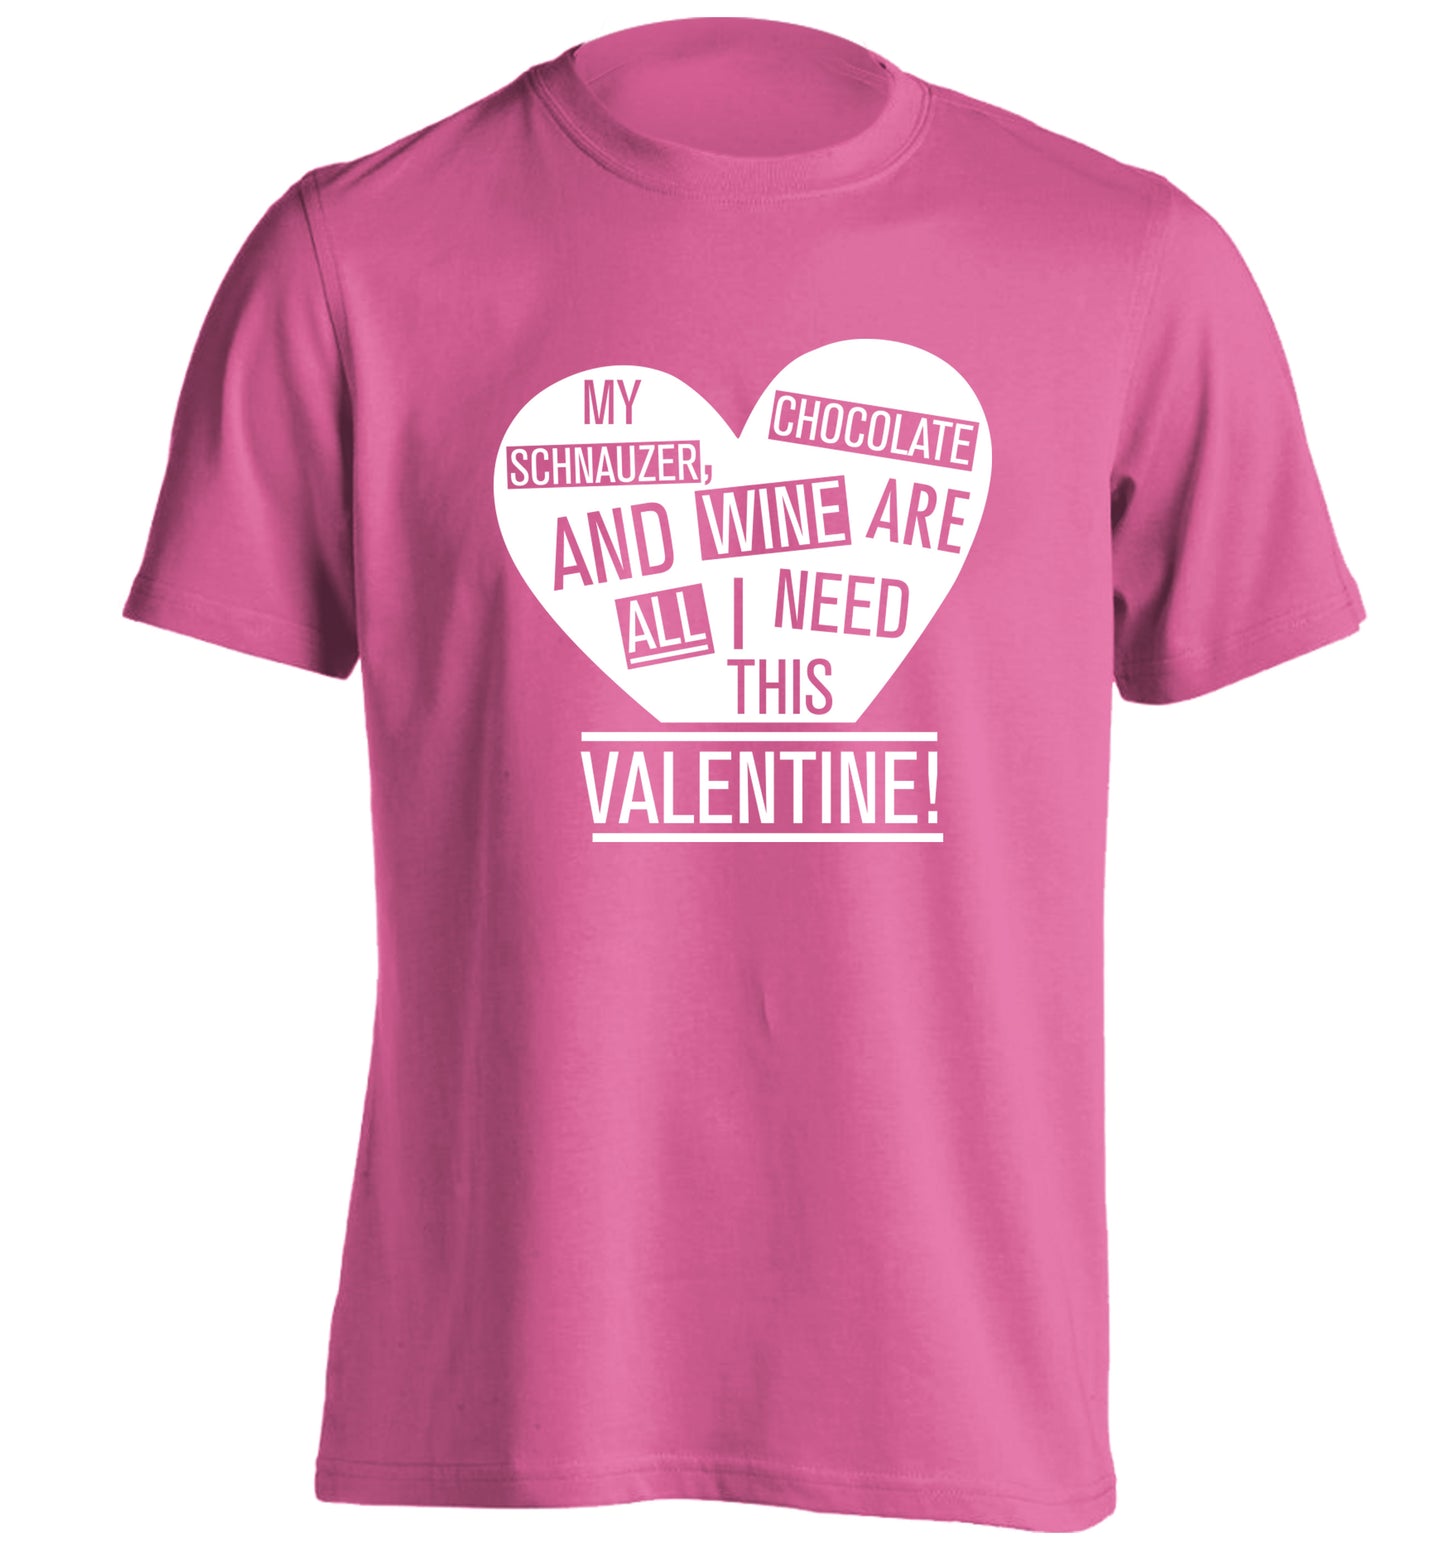 My schnauzer, chocolate and wine are all I need this valentine! adults unisex pink Tshirt 2XL